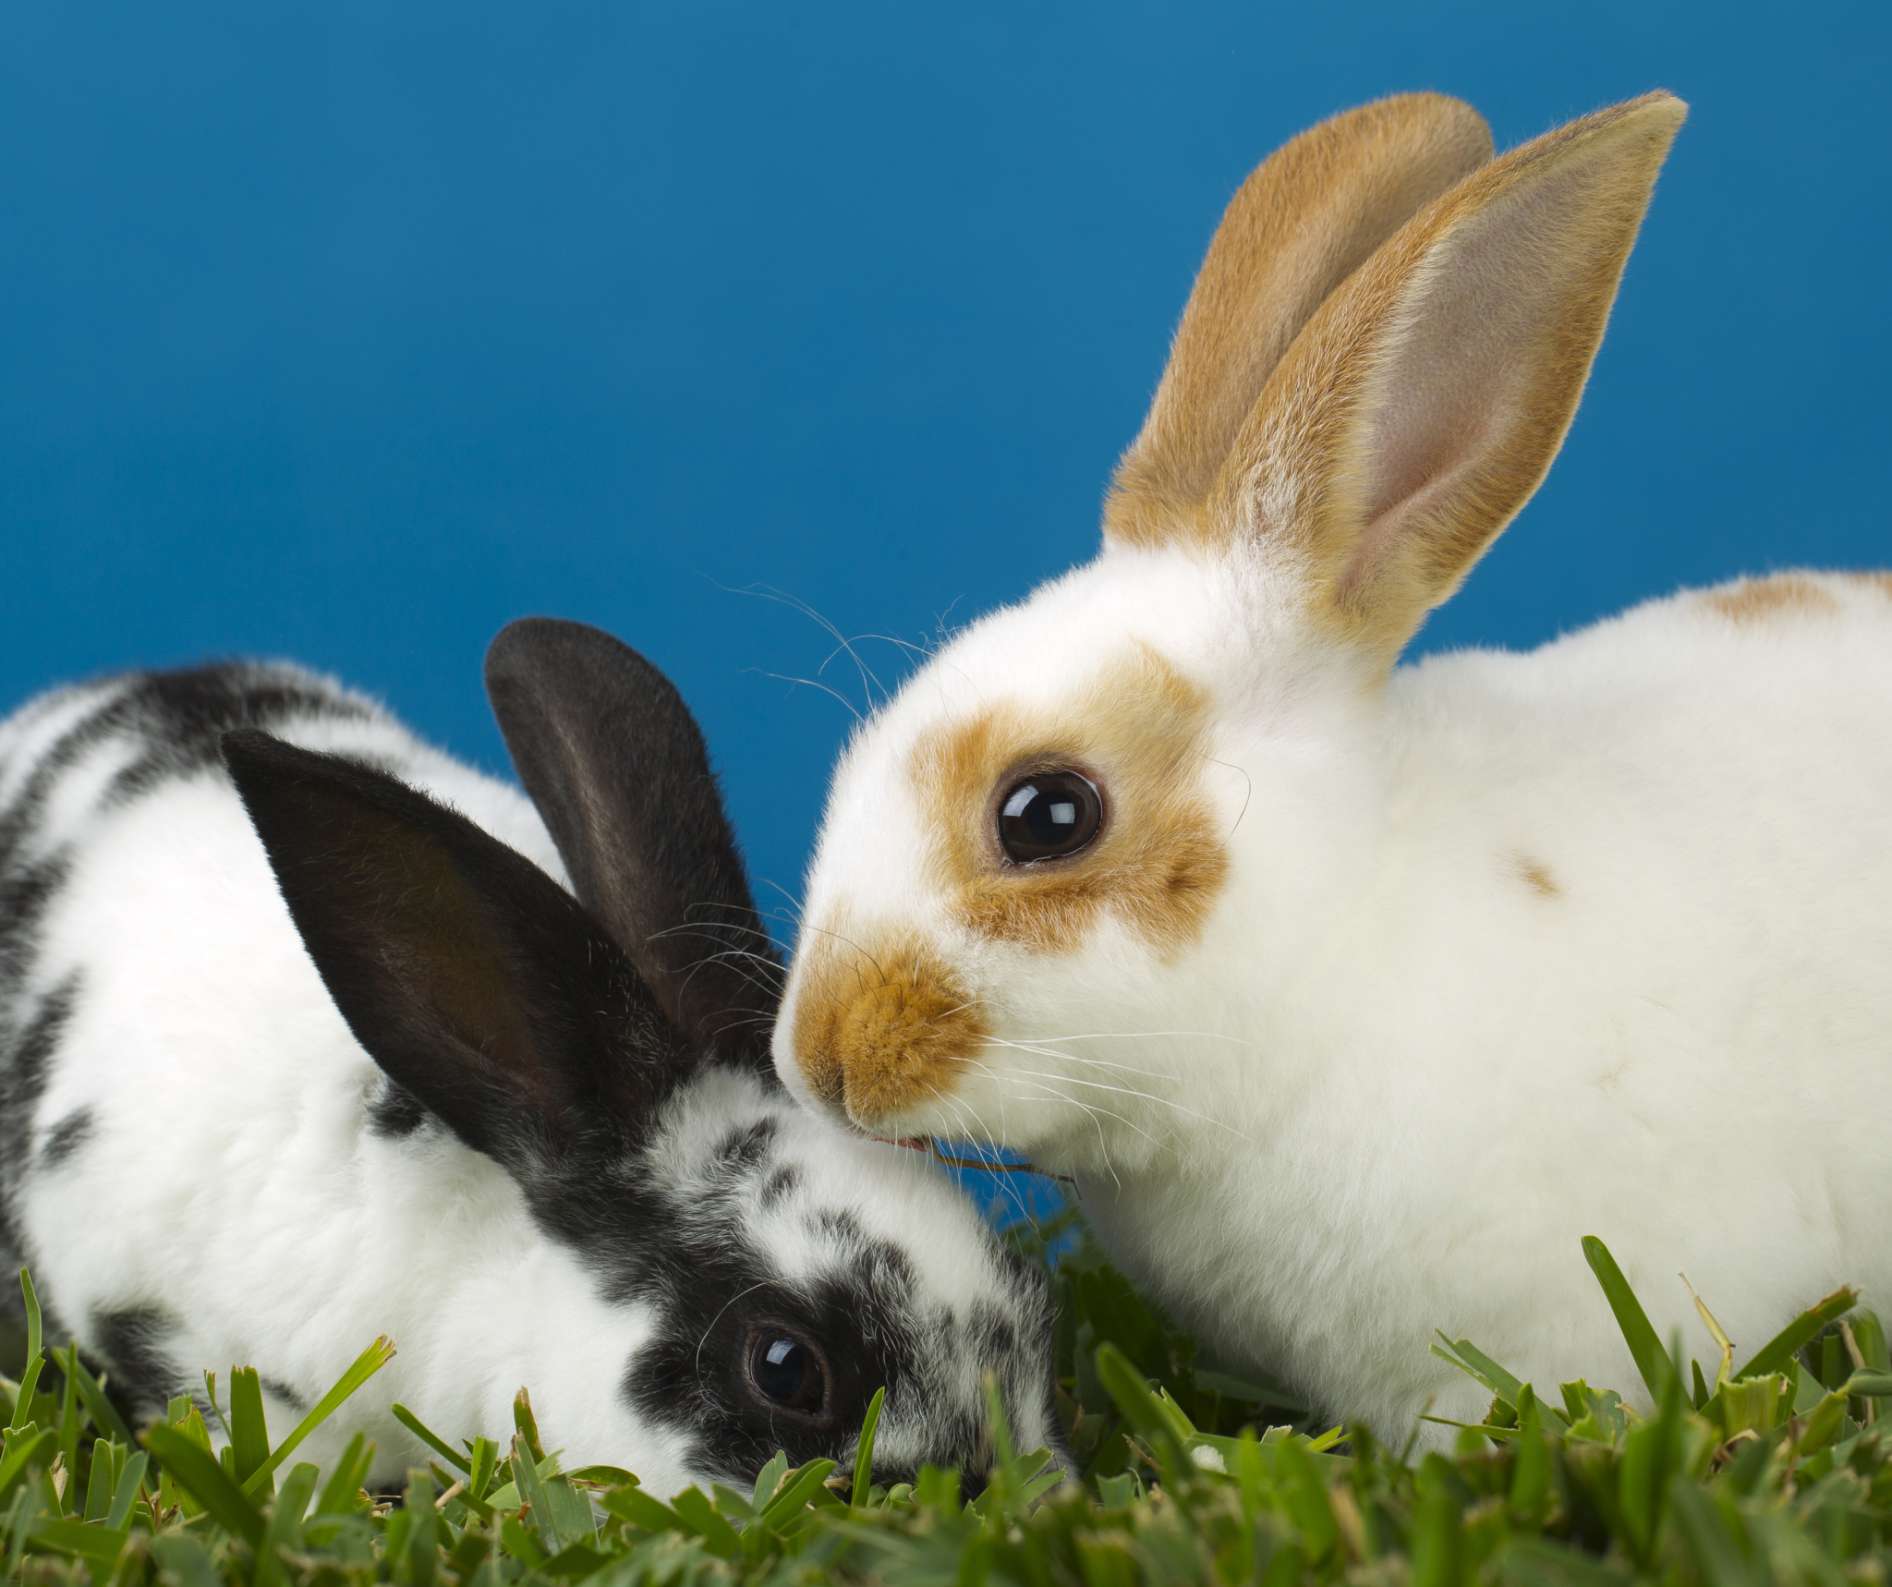 A pair of rabbits close together